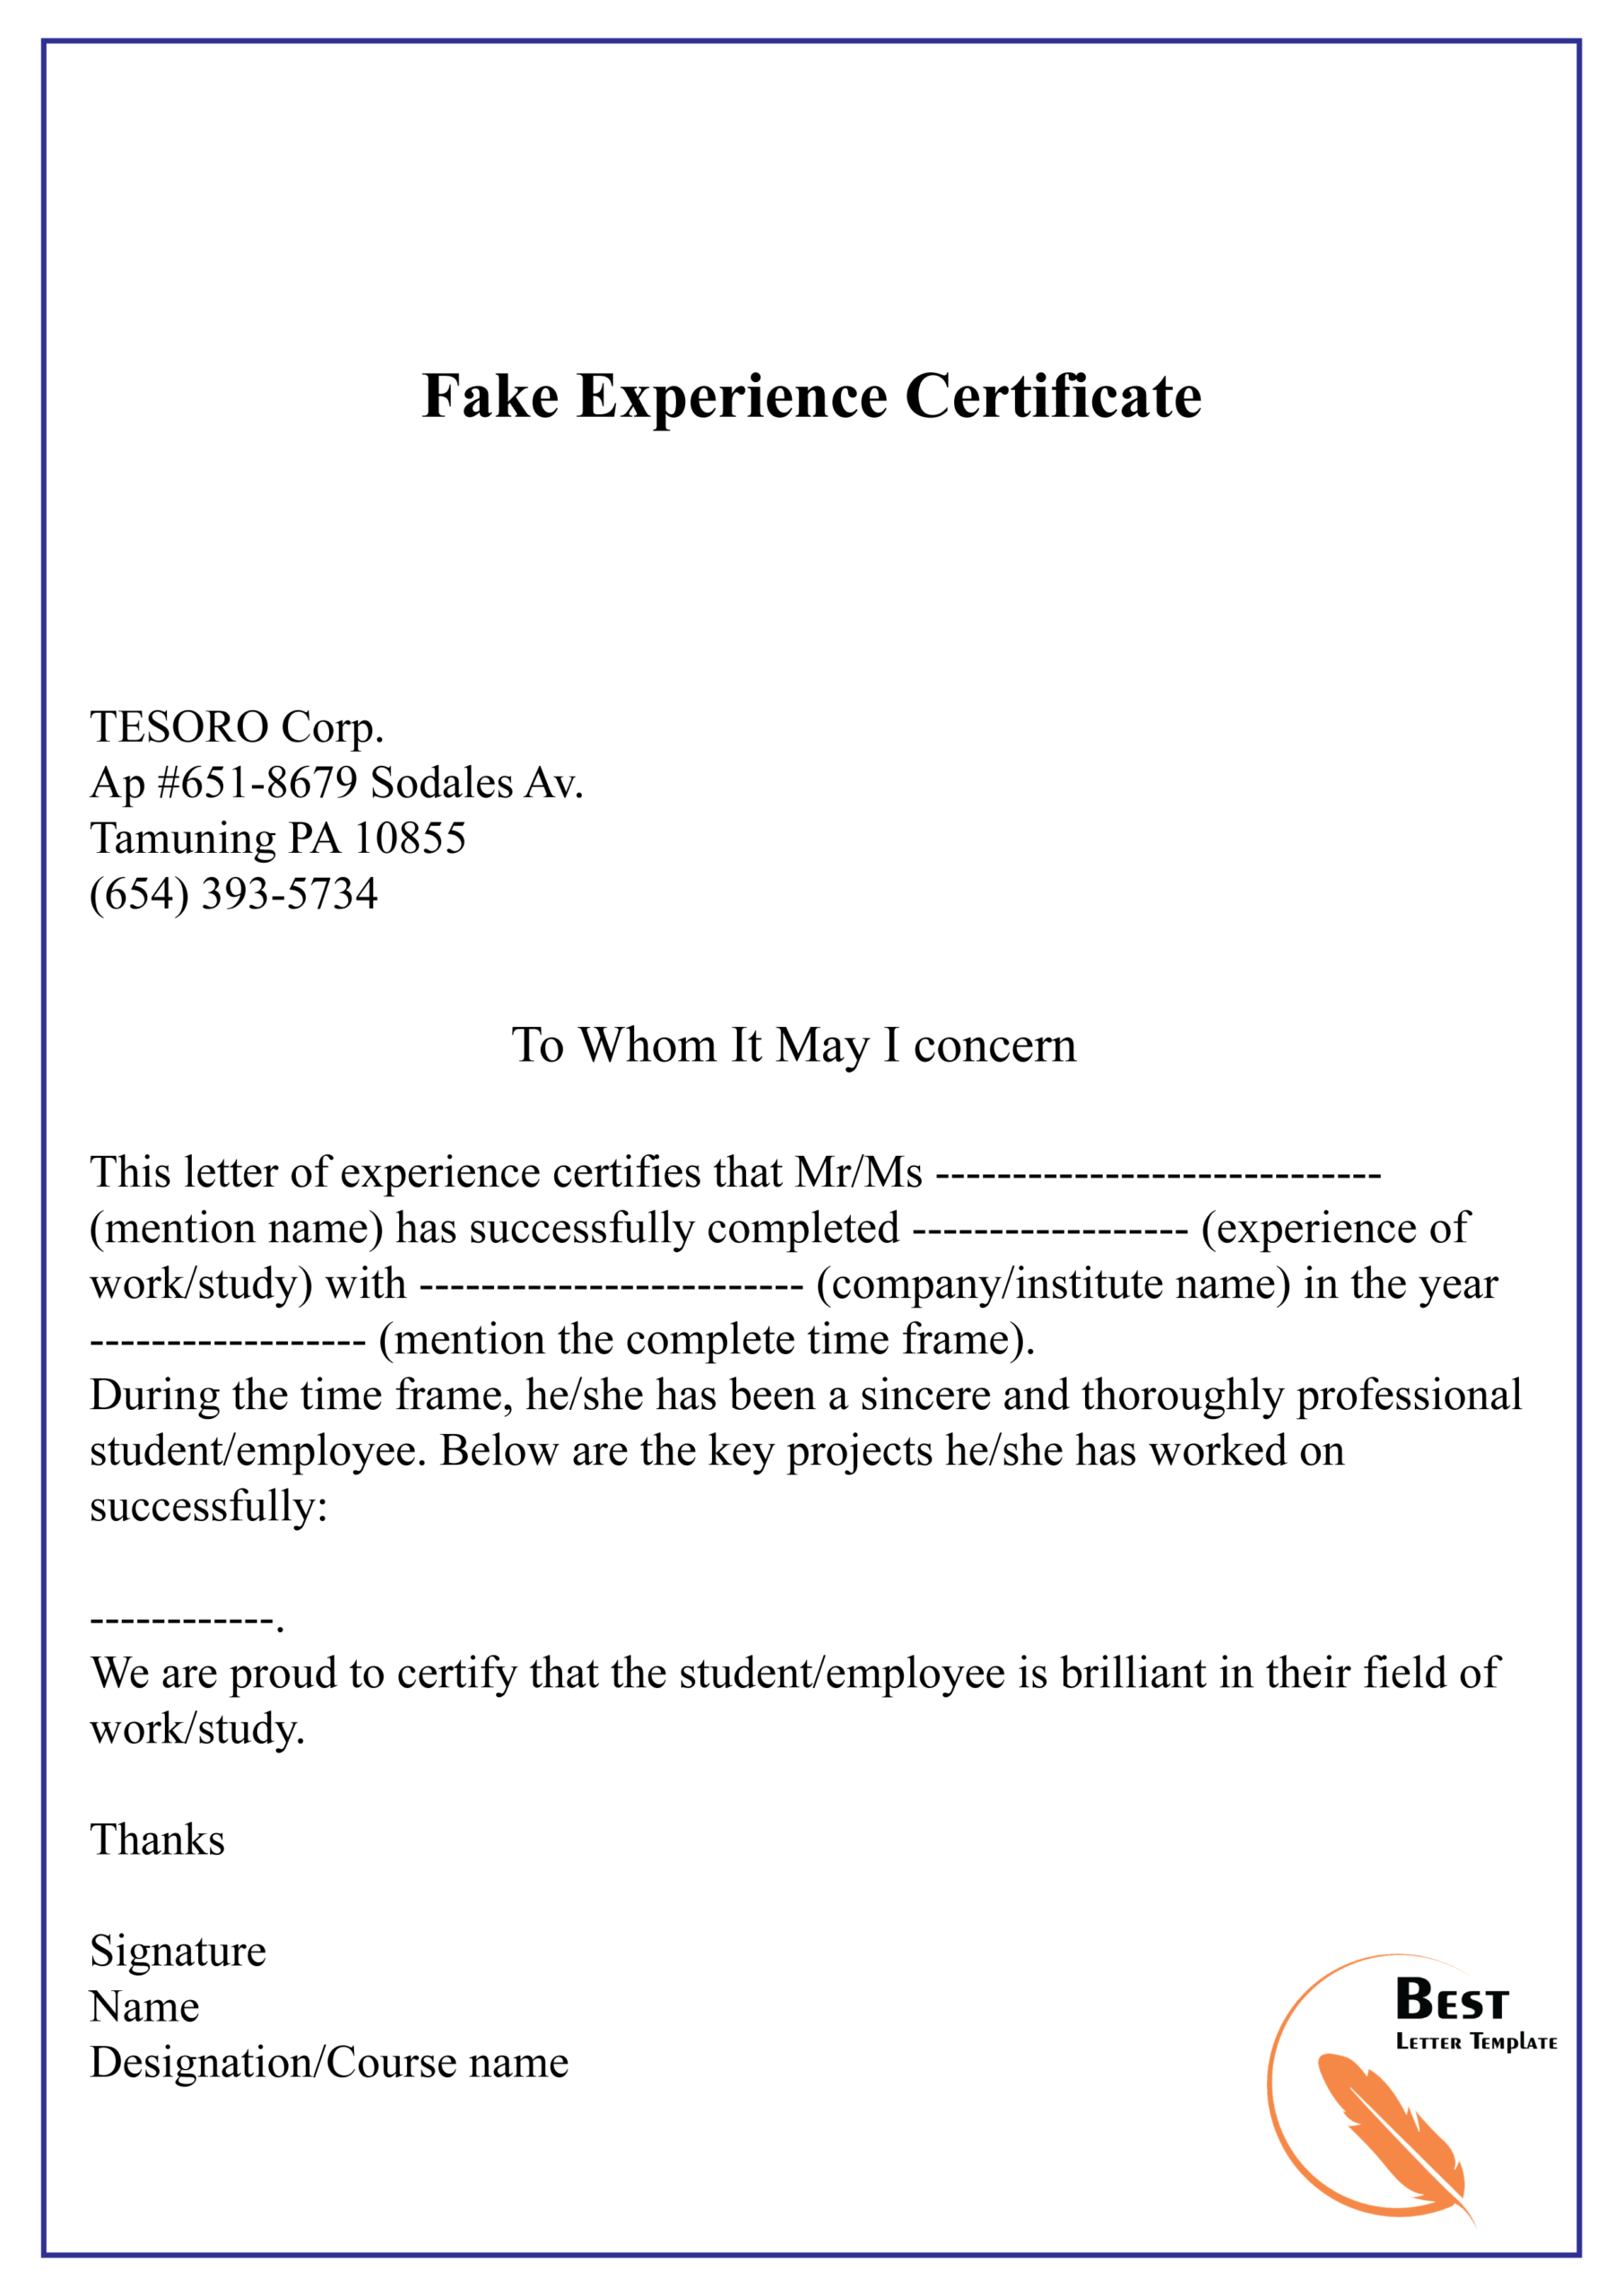 Fake Experience Certificate 01 | Best Letter Template Within Certificate Of Experience Template